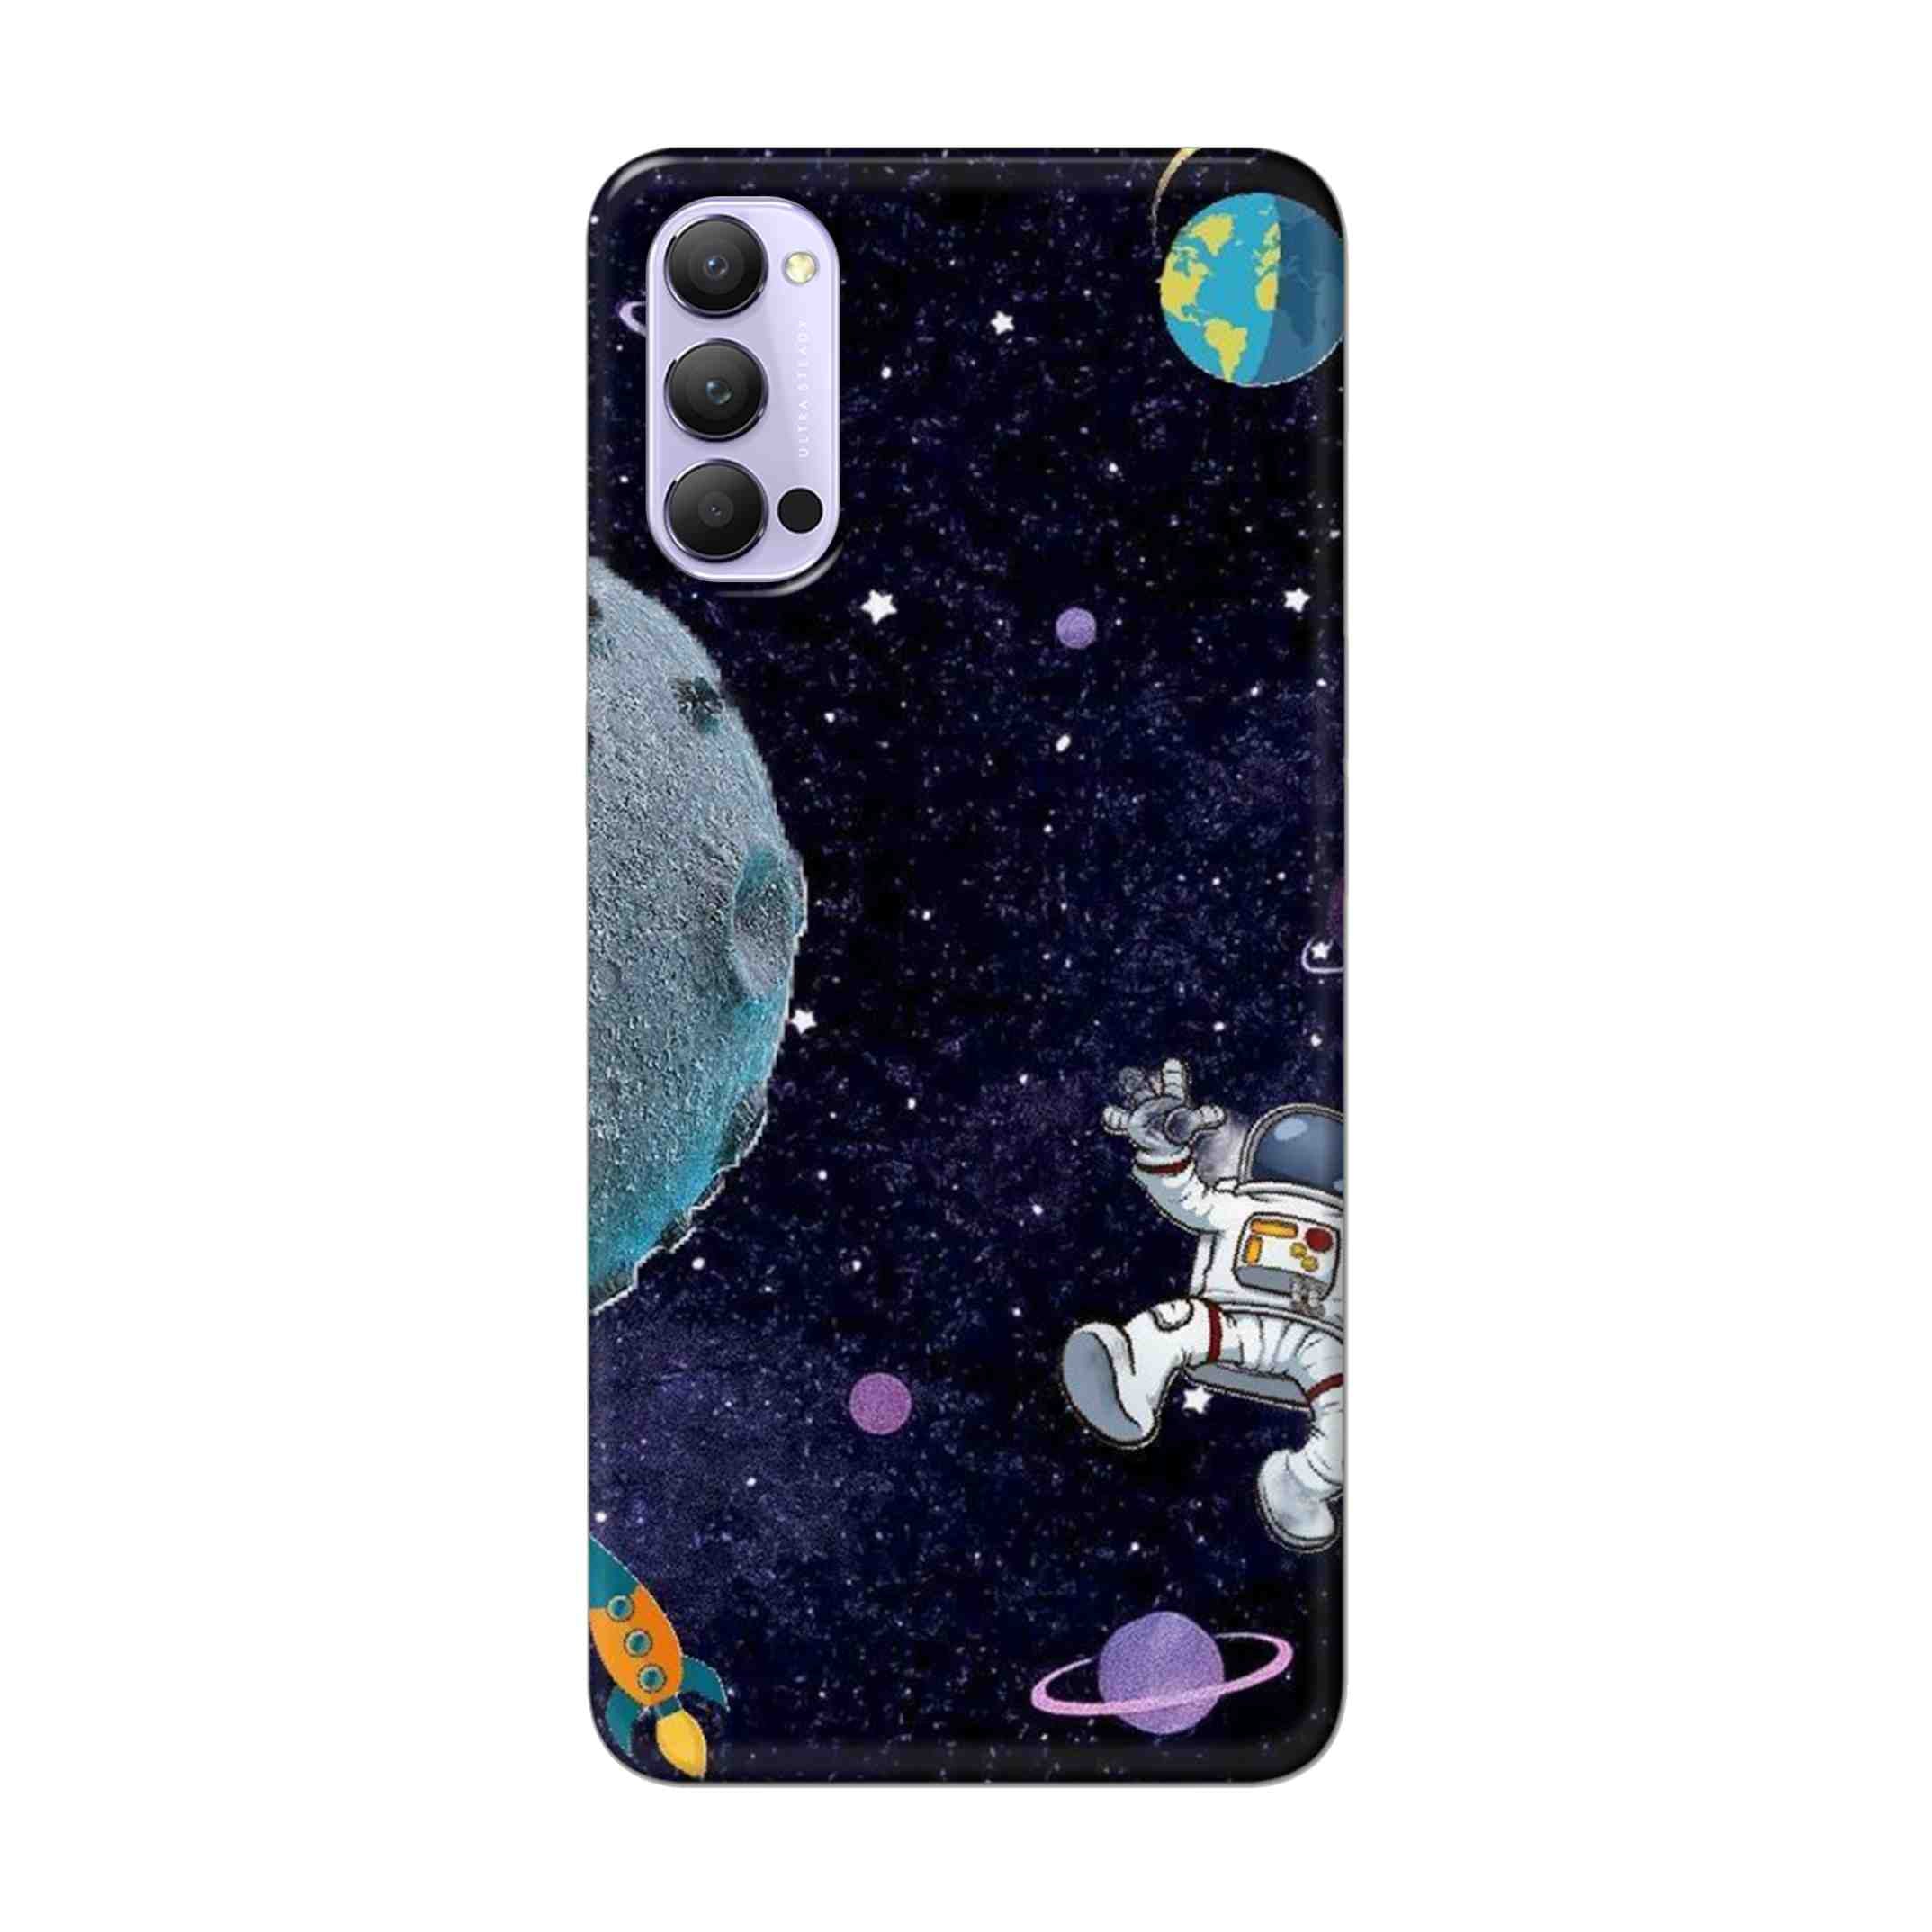 Buy Space Hard Back Mobile Phone Case Cover For Oppo Reno 4 Pro Online